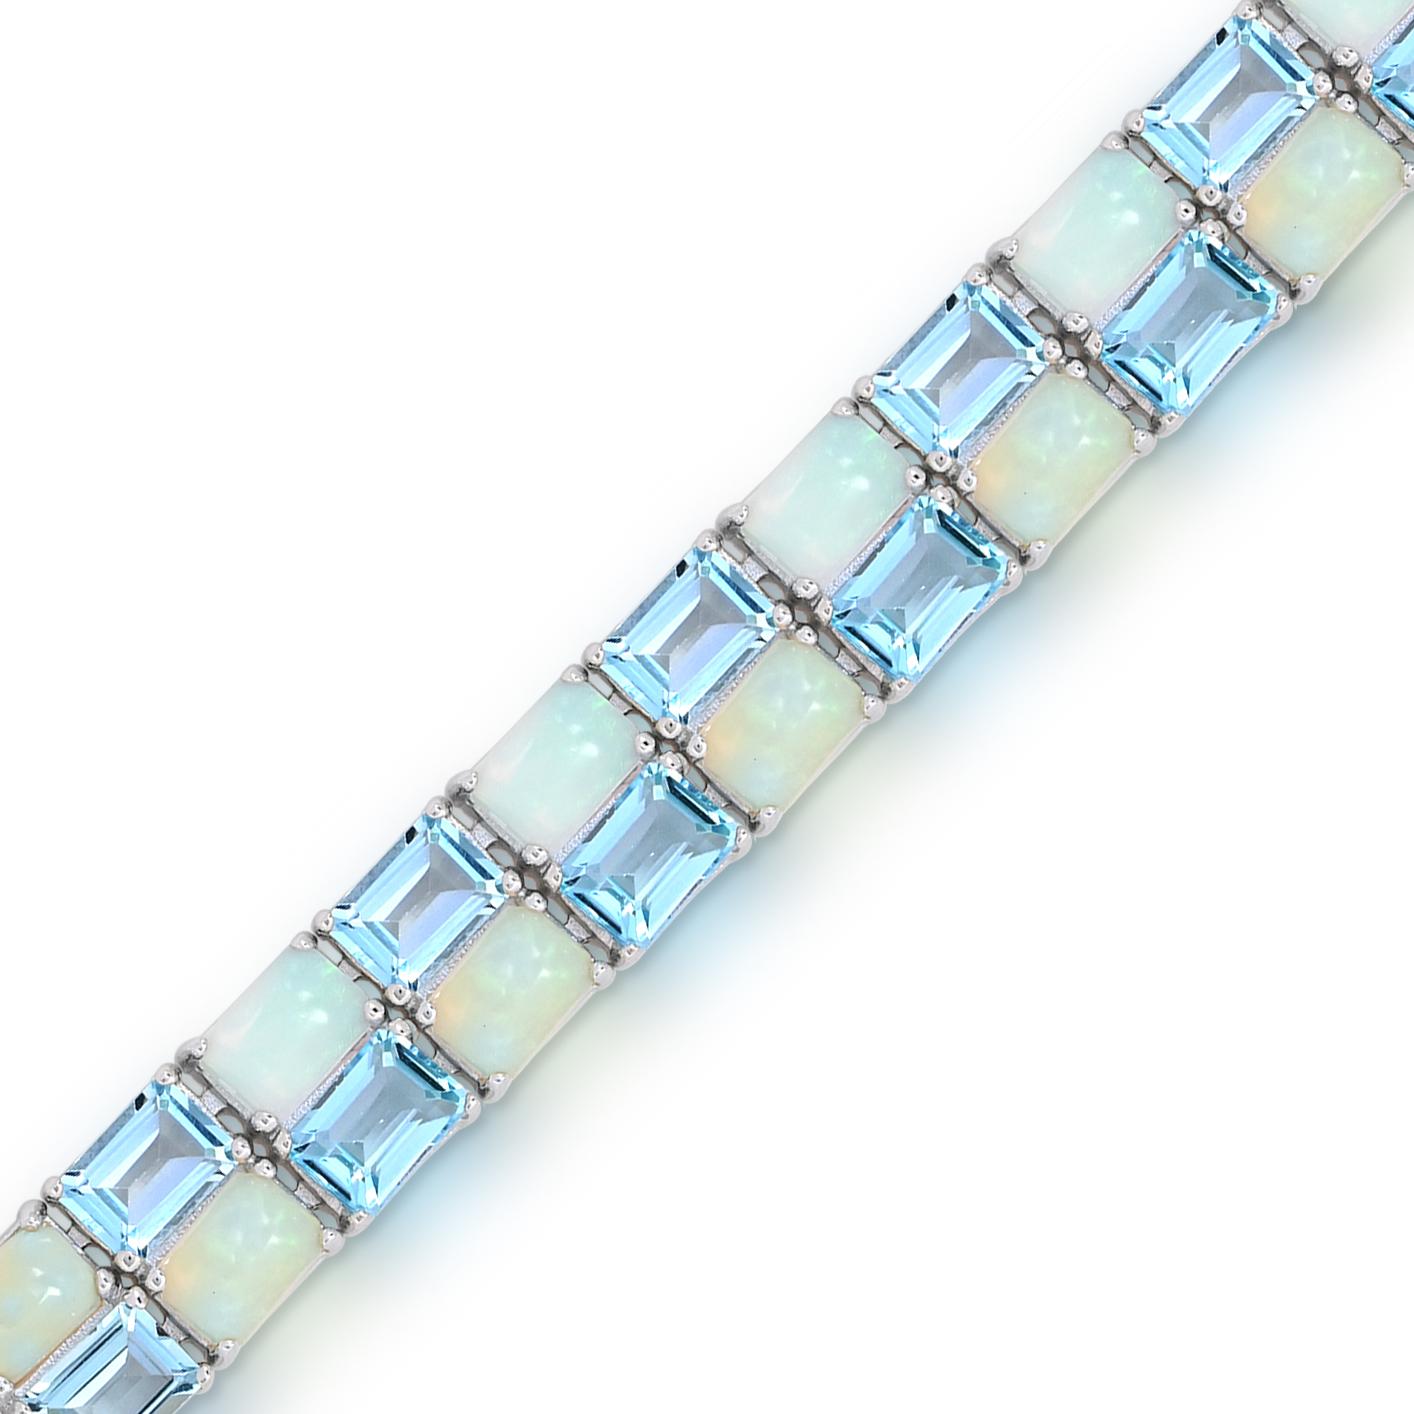 This stunning bracelet features 44 pieces of brilliant emerald-cut sky blue topaz and octangle opal stones set in an alternating pattern, creating a visually captivating design. Crafted with precision and attention to detail, the sterling silver